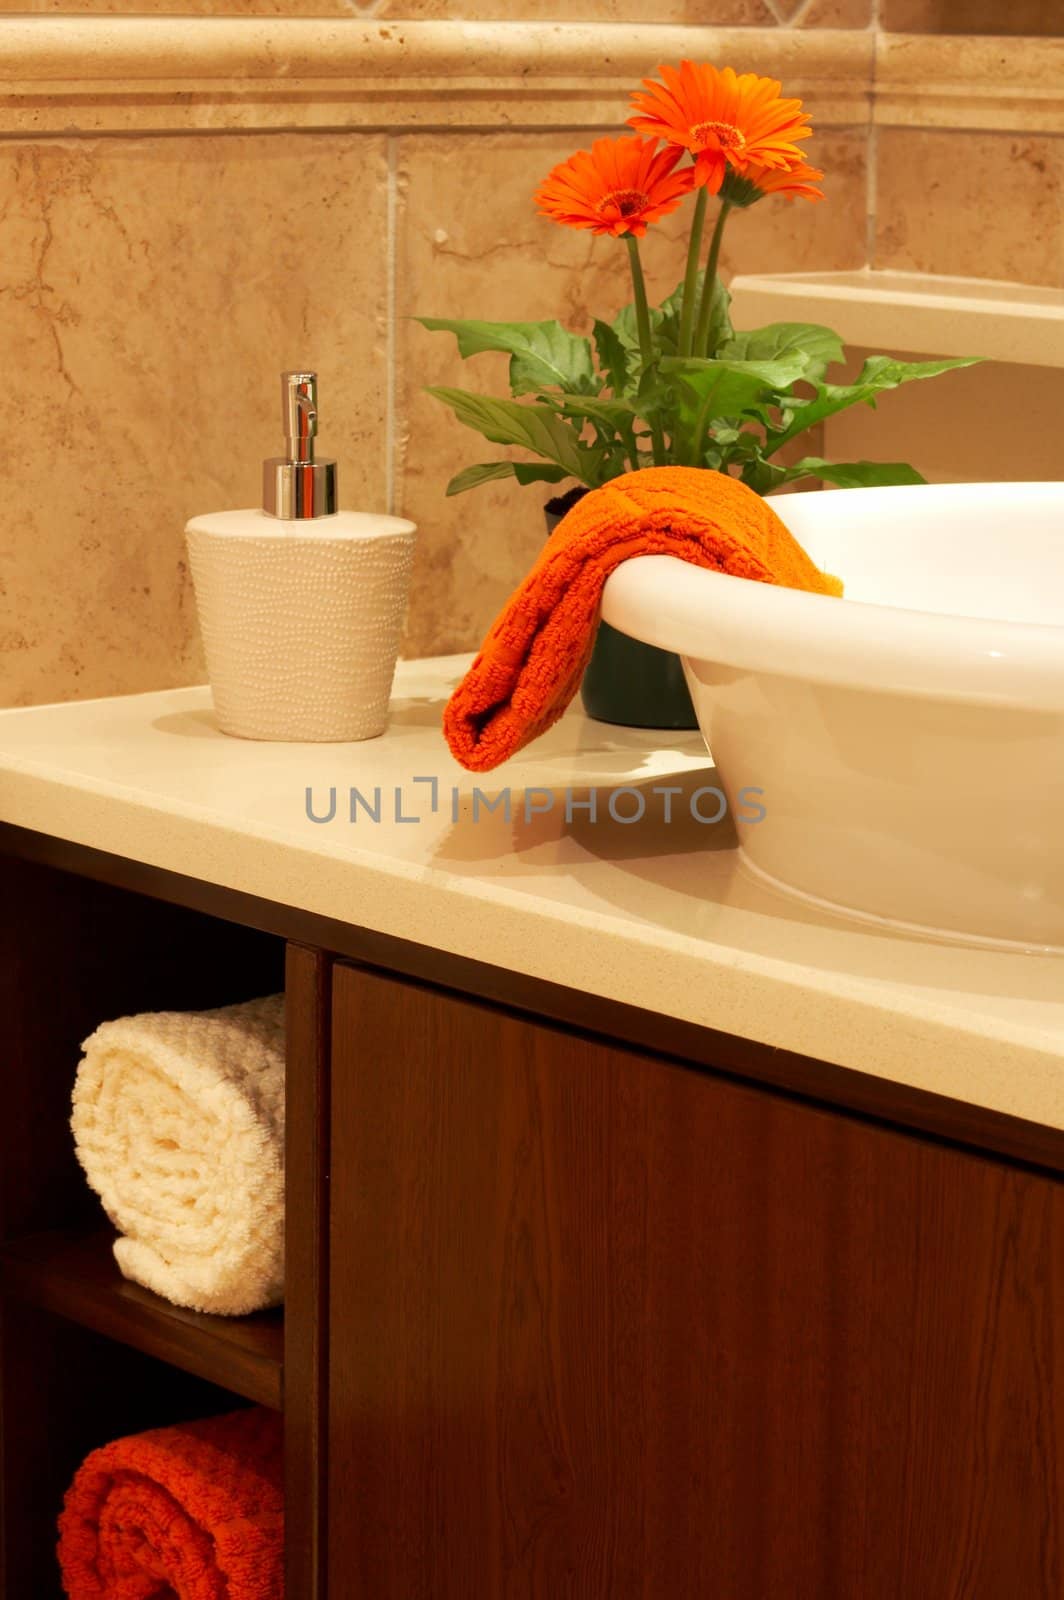 Beautiful sink in a bathroom with towel on it and a flower